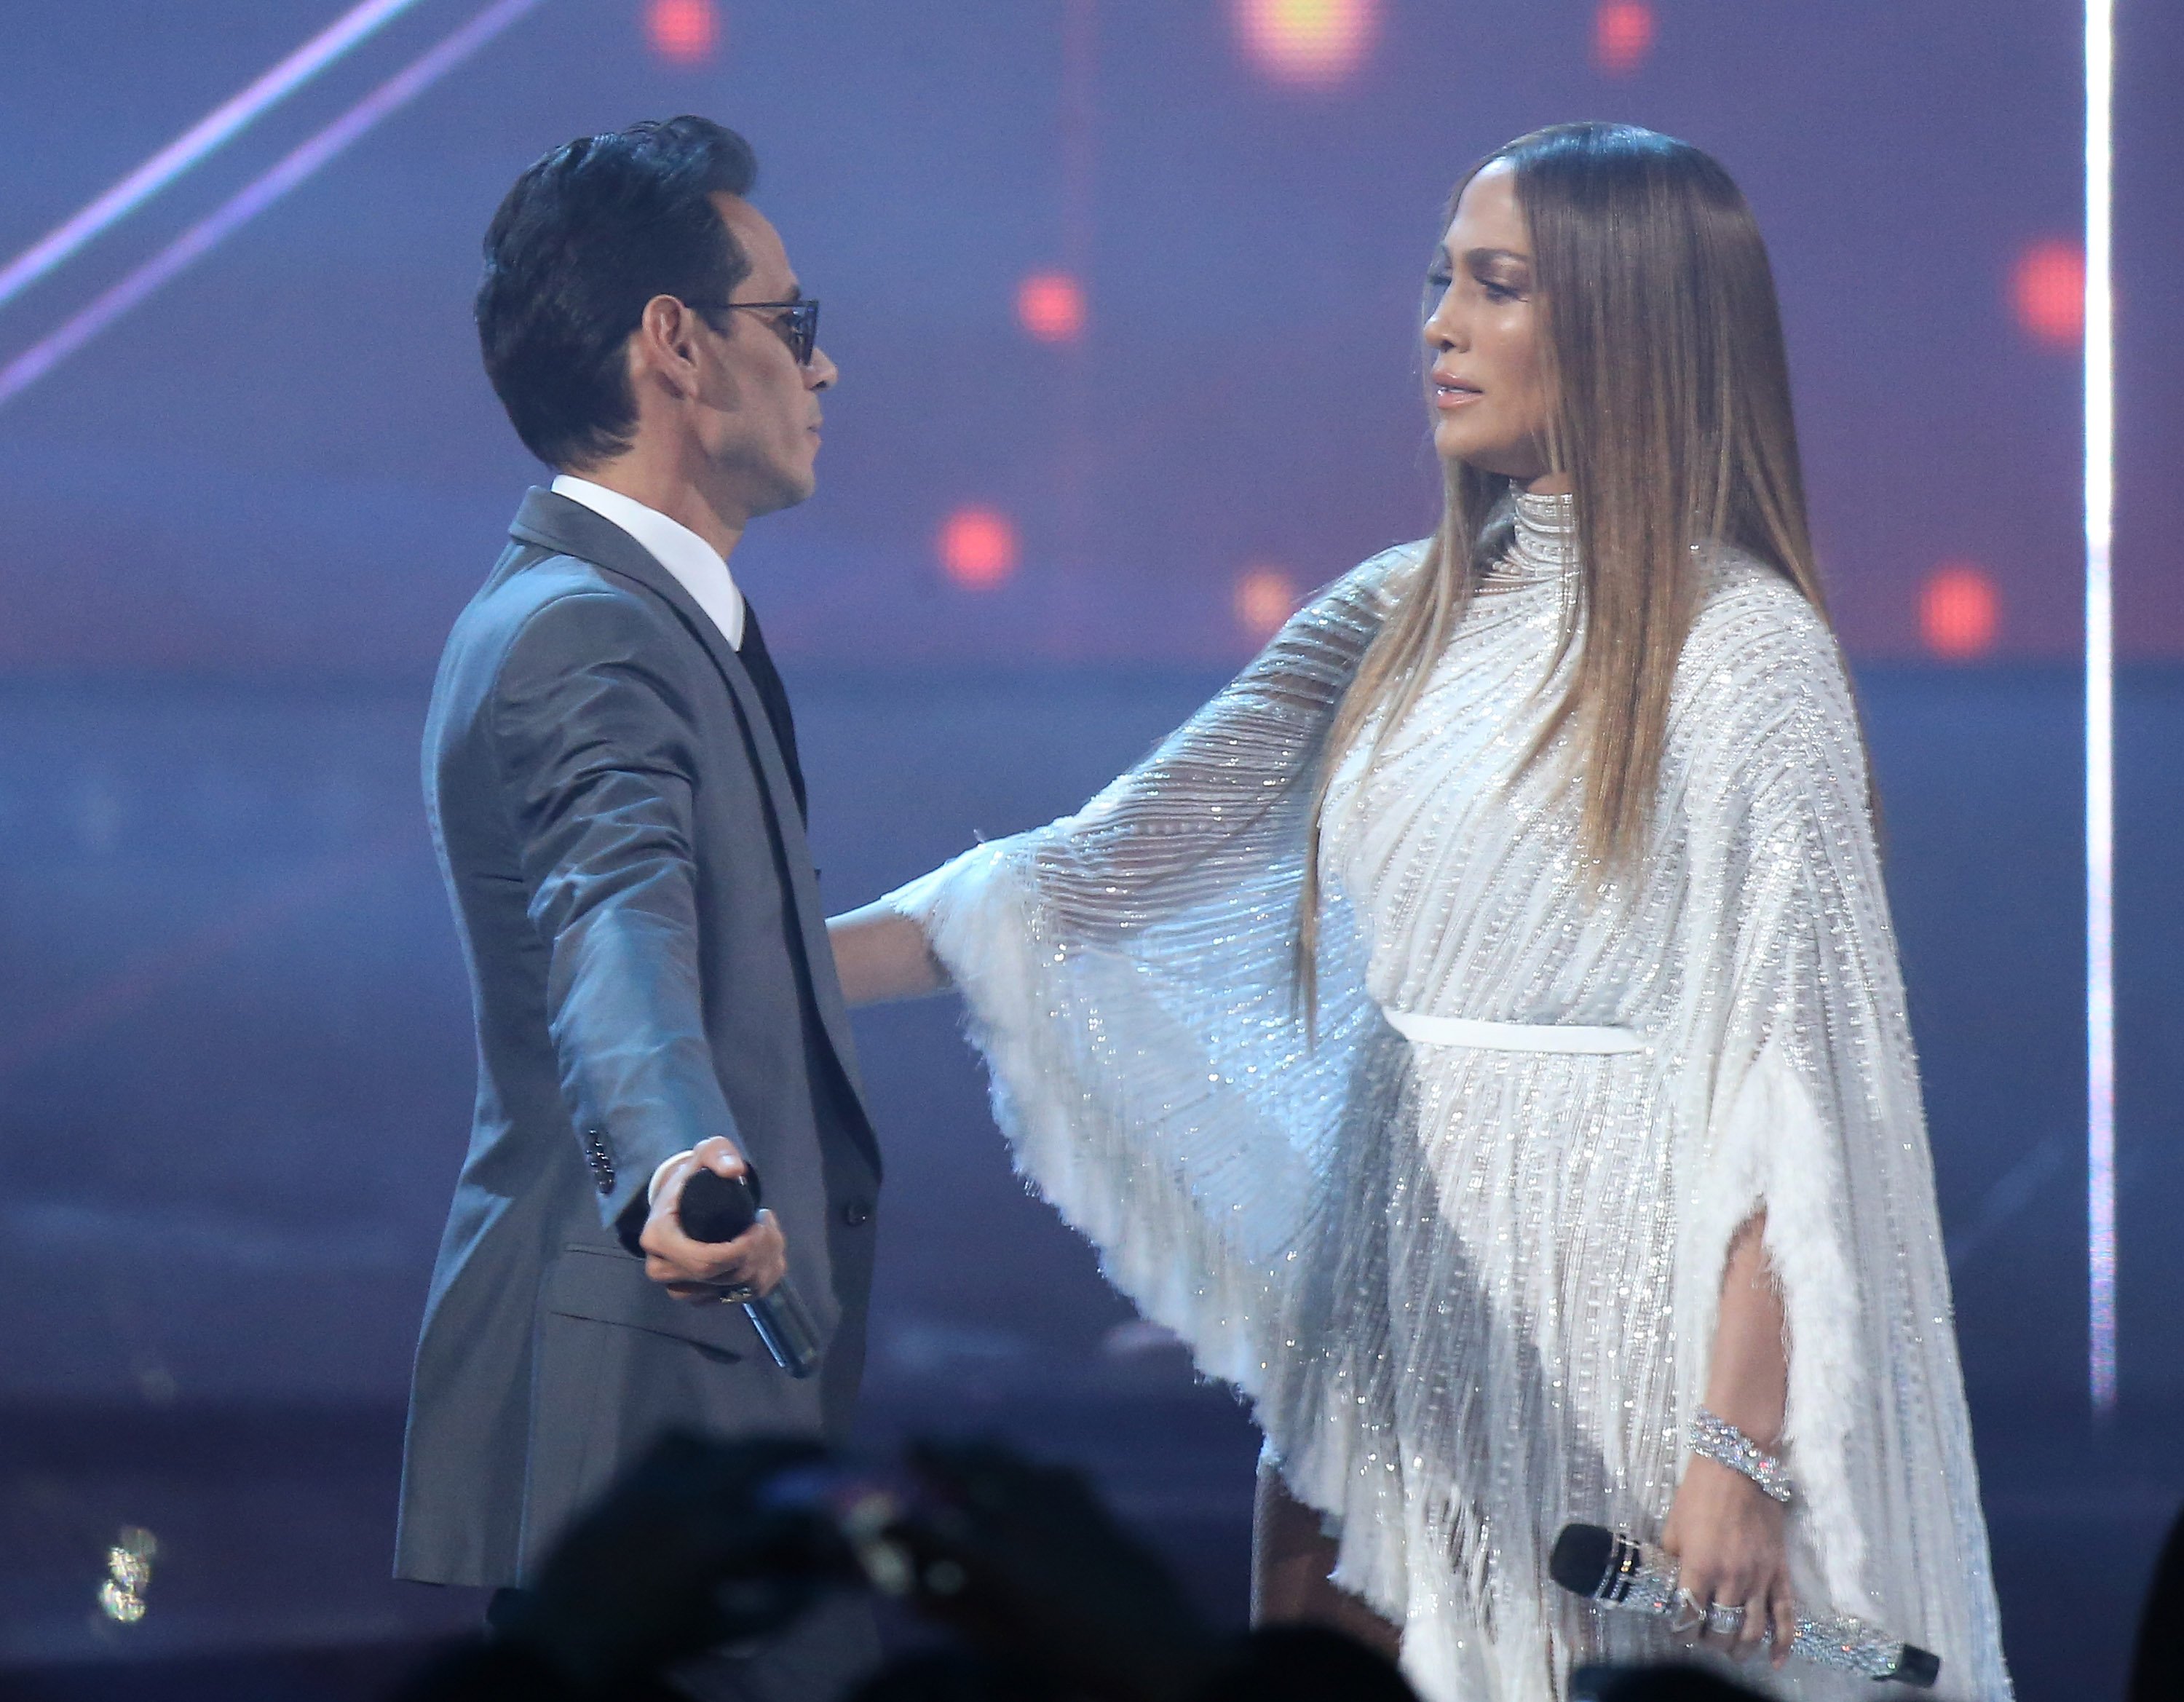 Jennifer Lopez and Marc Anthony sing during a concert.